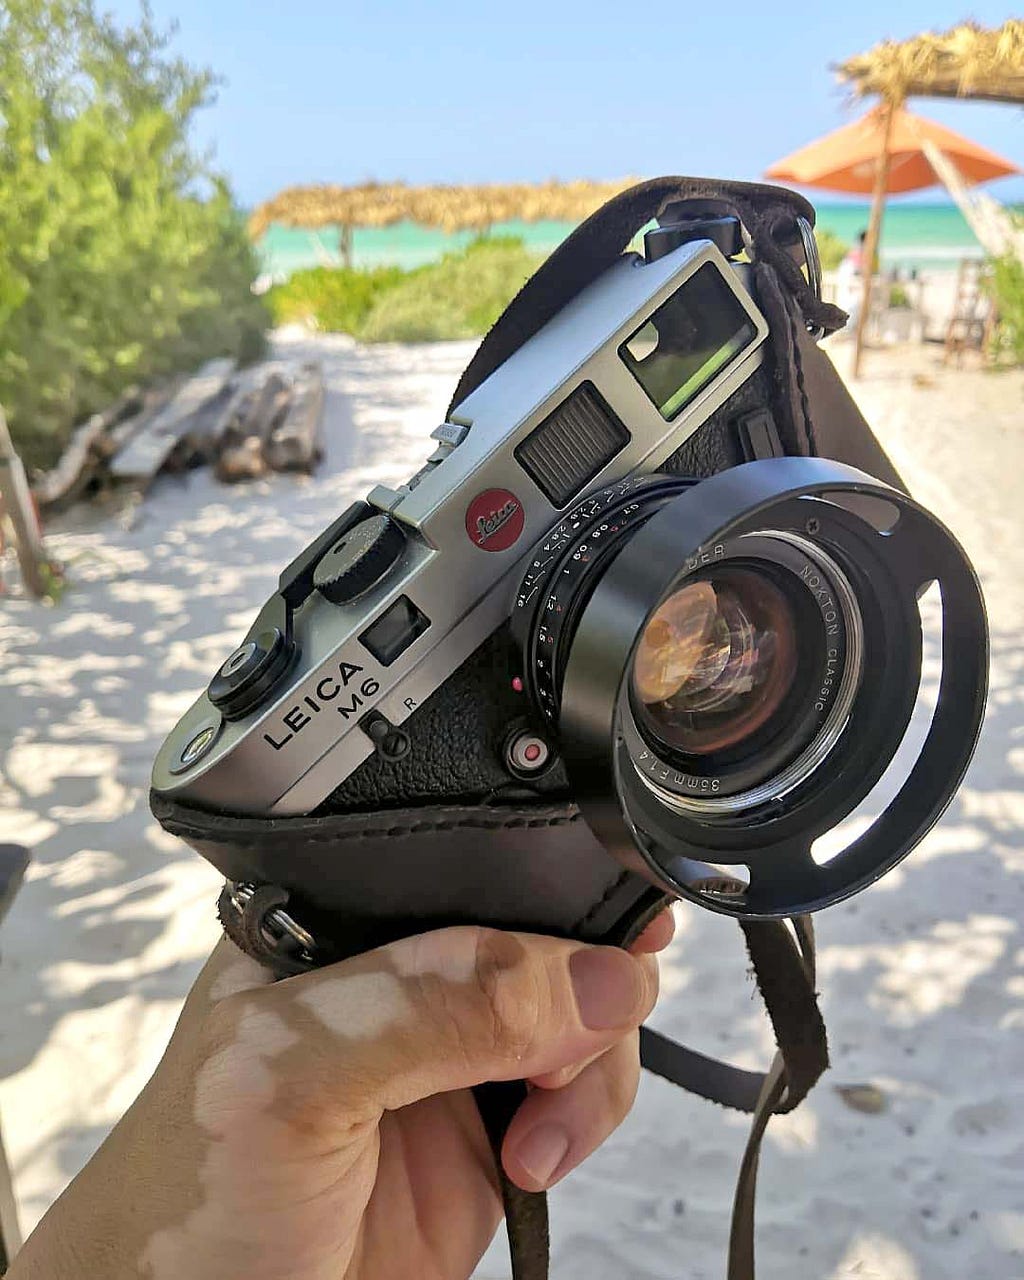 A Leica M6 camera with a halfcase leather case, in front of the beach in Yucatan, Mexico.